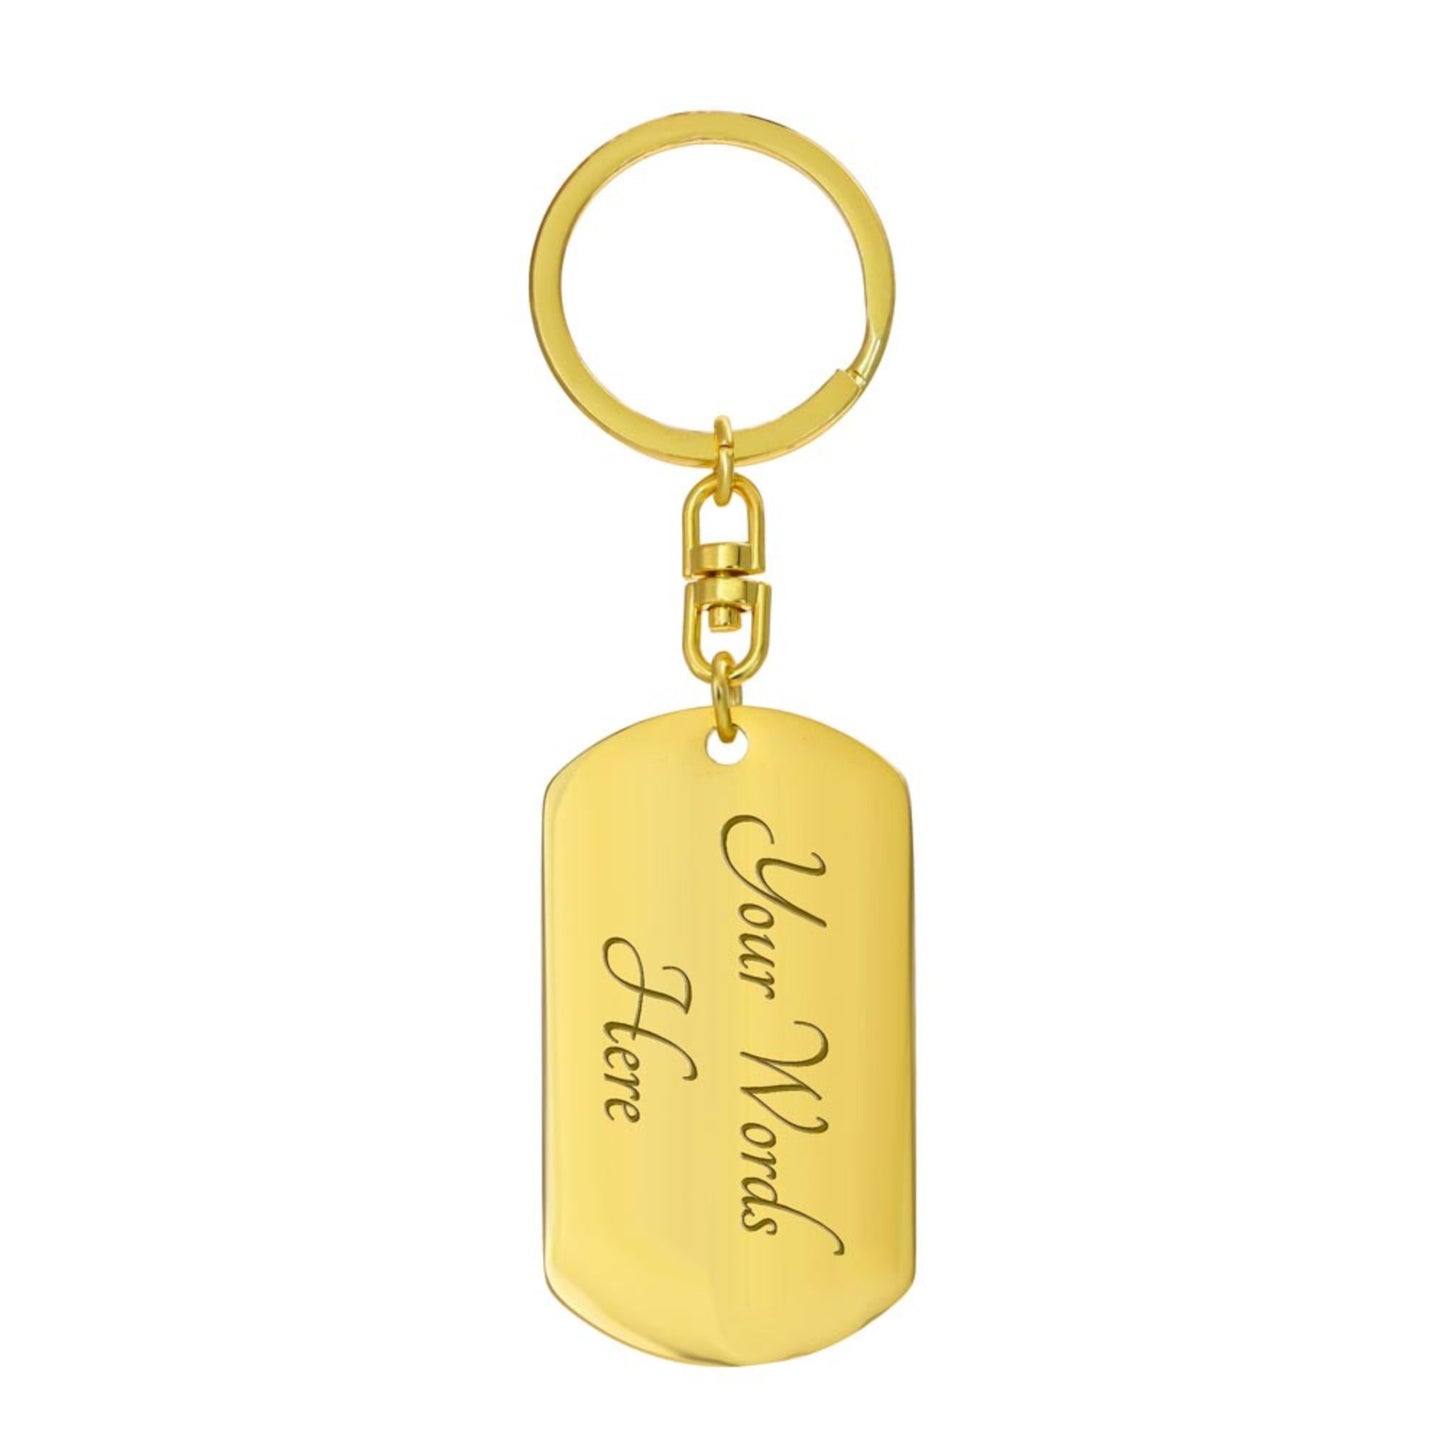 God is Within Her - Gold Dog Tag with Swivel Keychain Engraving: No Jesus Passion Apparel